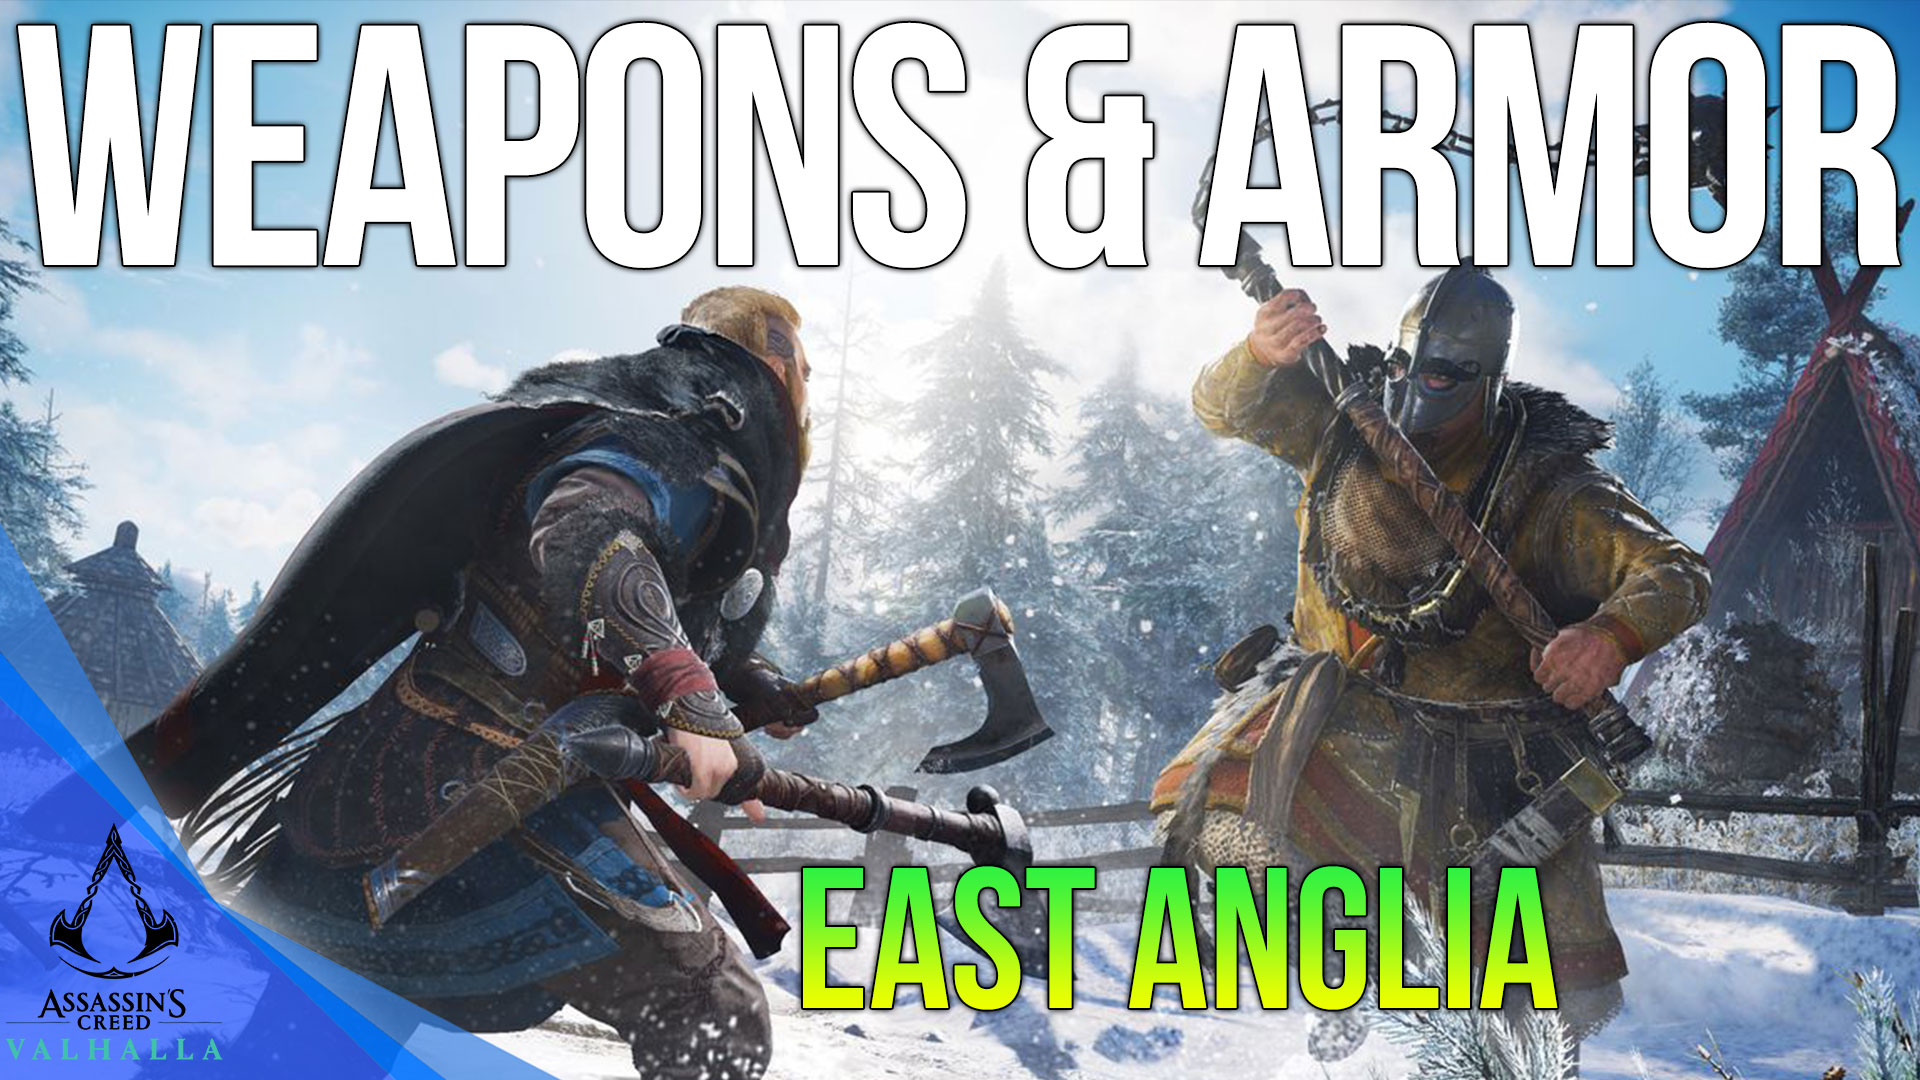 All East Anglia Weapons & Armor